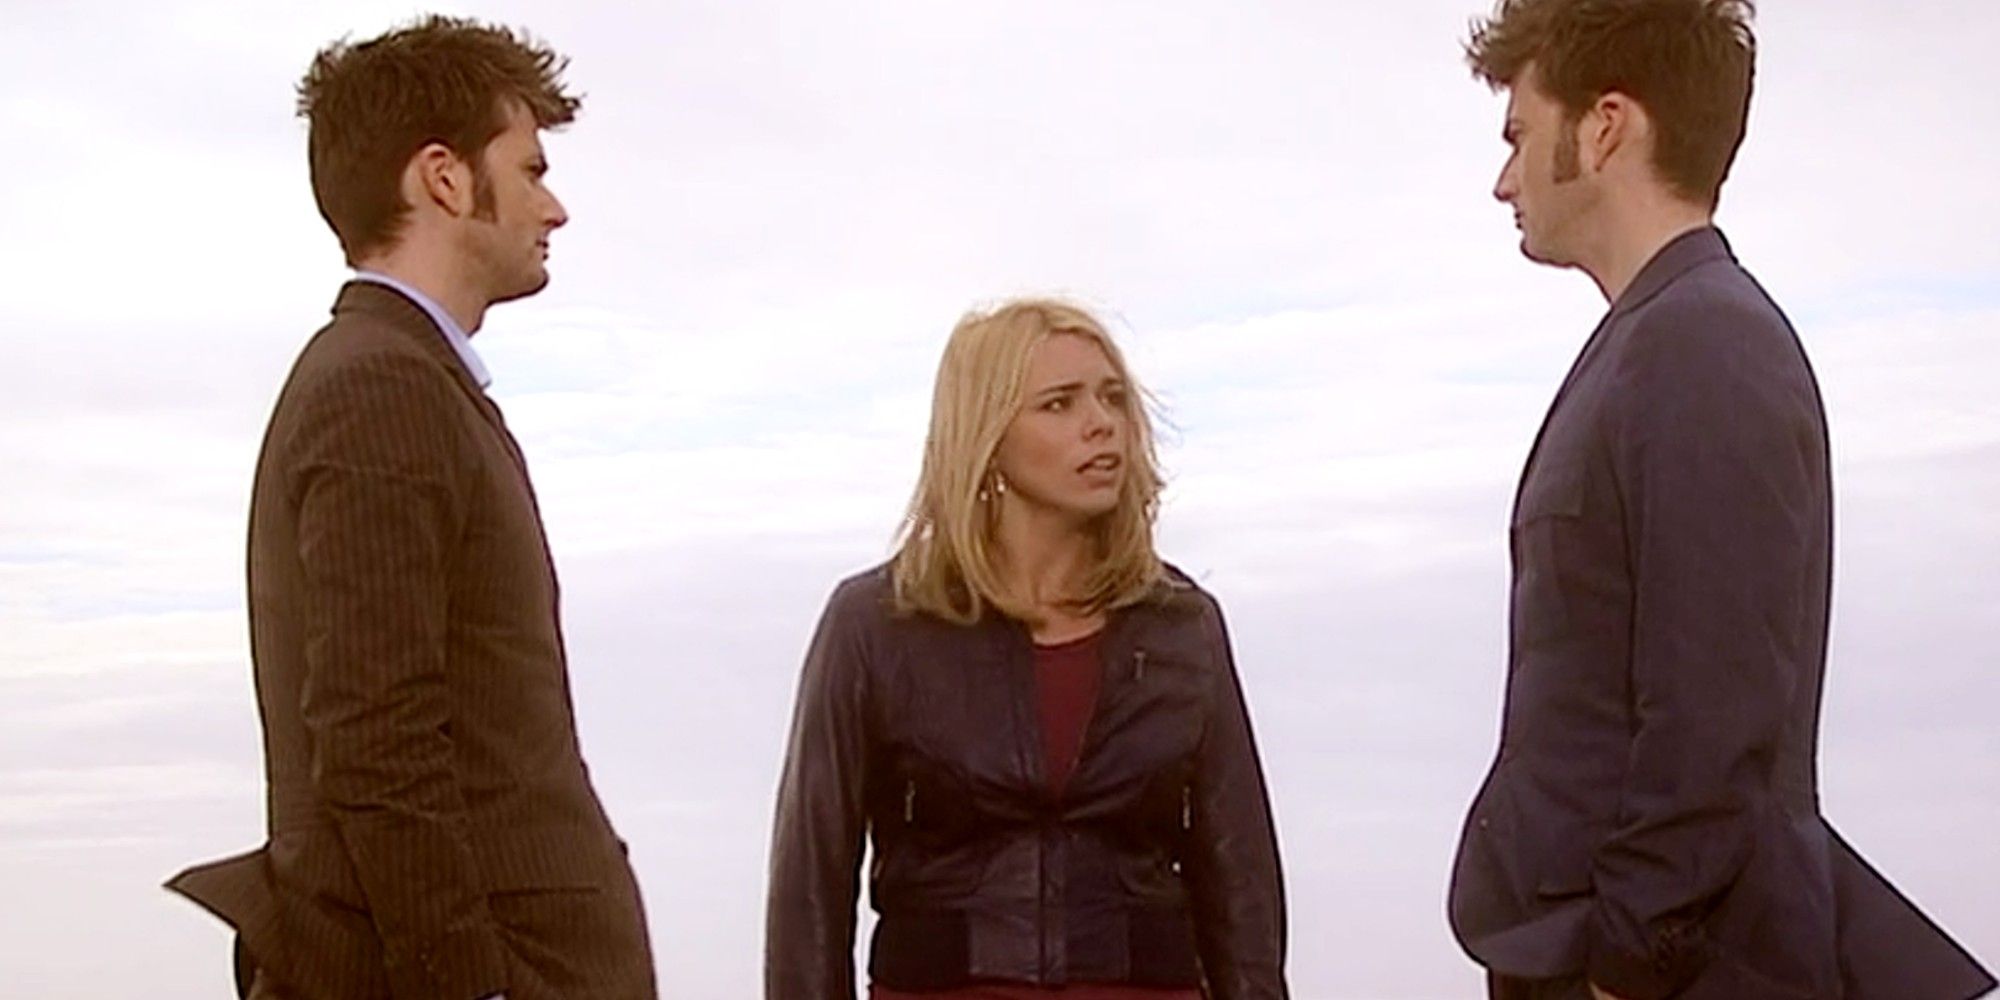 Doctor Who Journeys End Billie Piper and David Tennant as Rose Tyler, The Tenth Doctor and Meta-Crisis Doctor